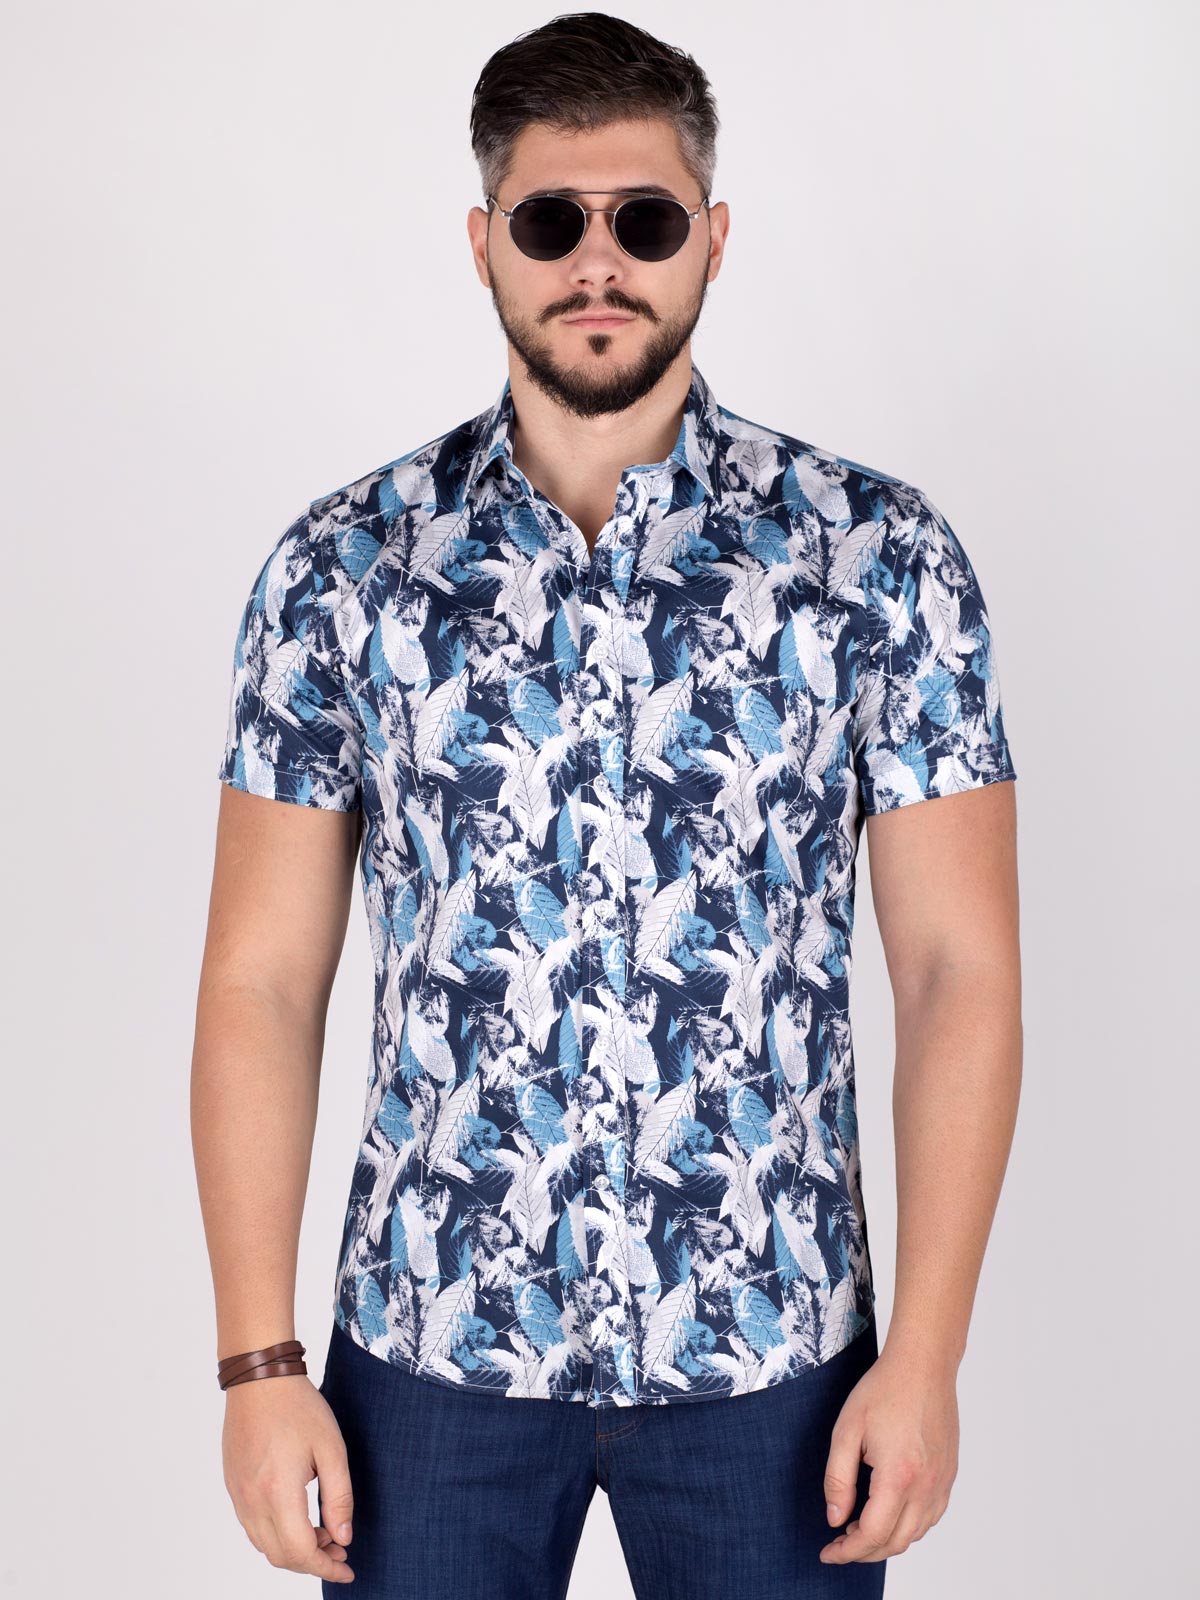 Shirt in white with blue leaf print - 80198 € 16.31 img2